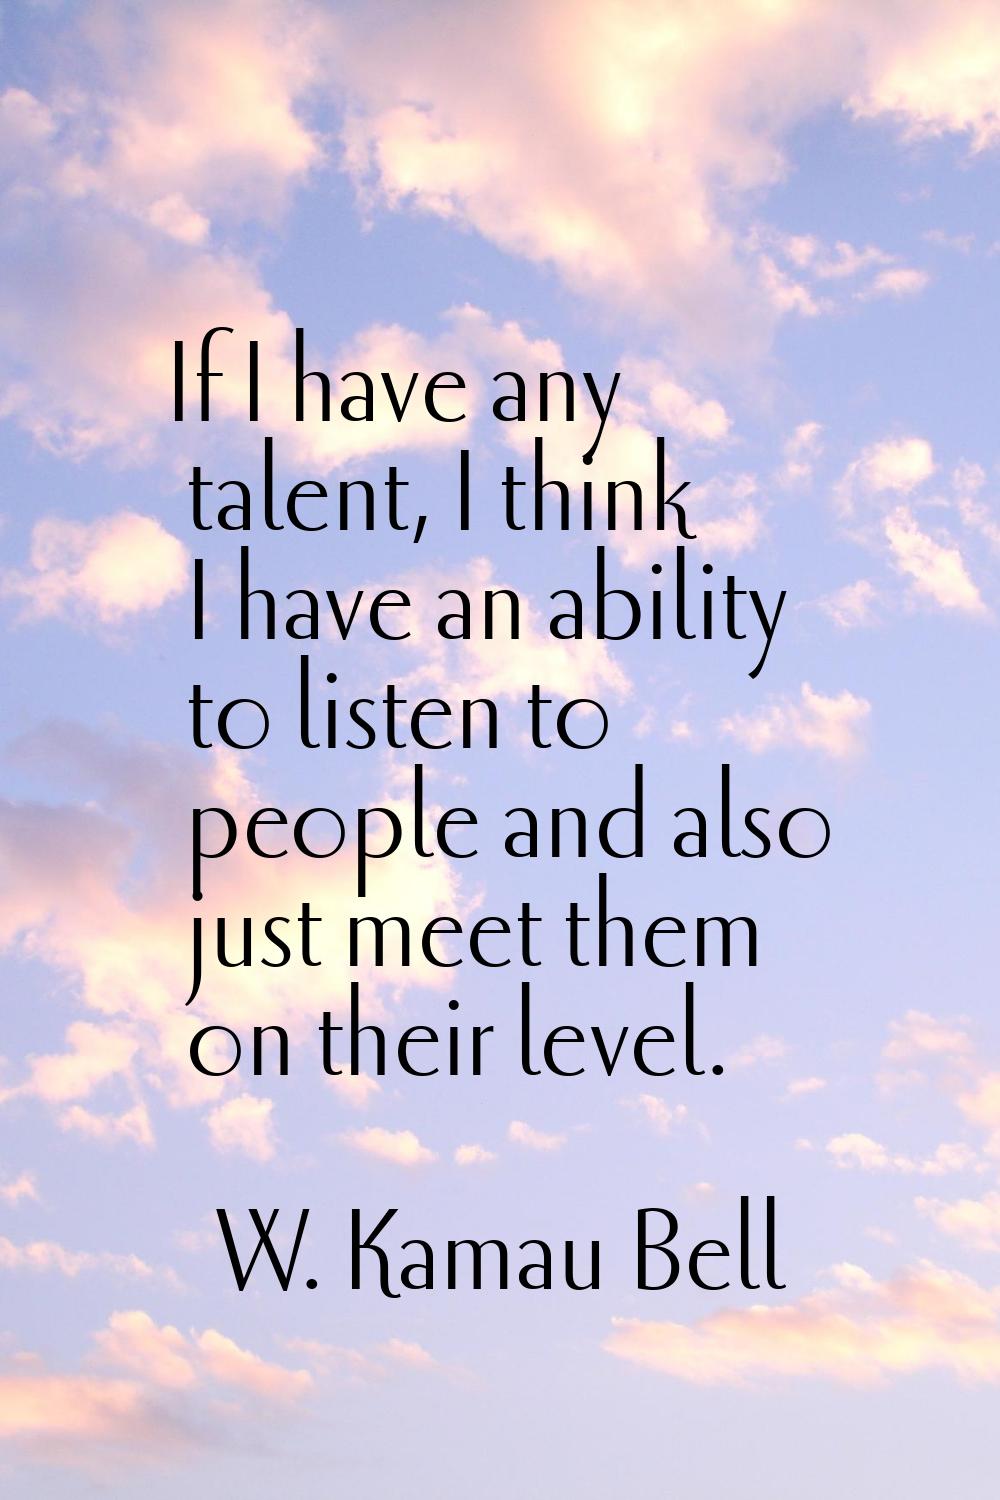 If I have any talent, I think I have an ability to listen to people and also just meet them on thei